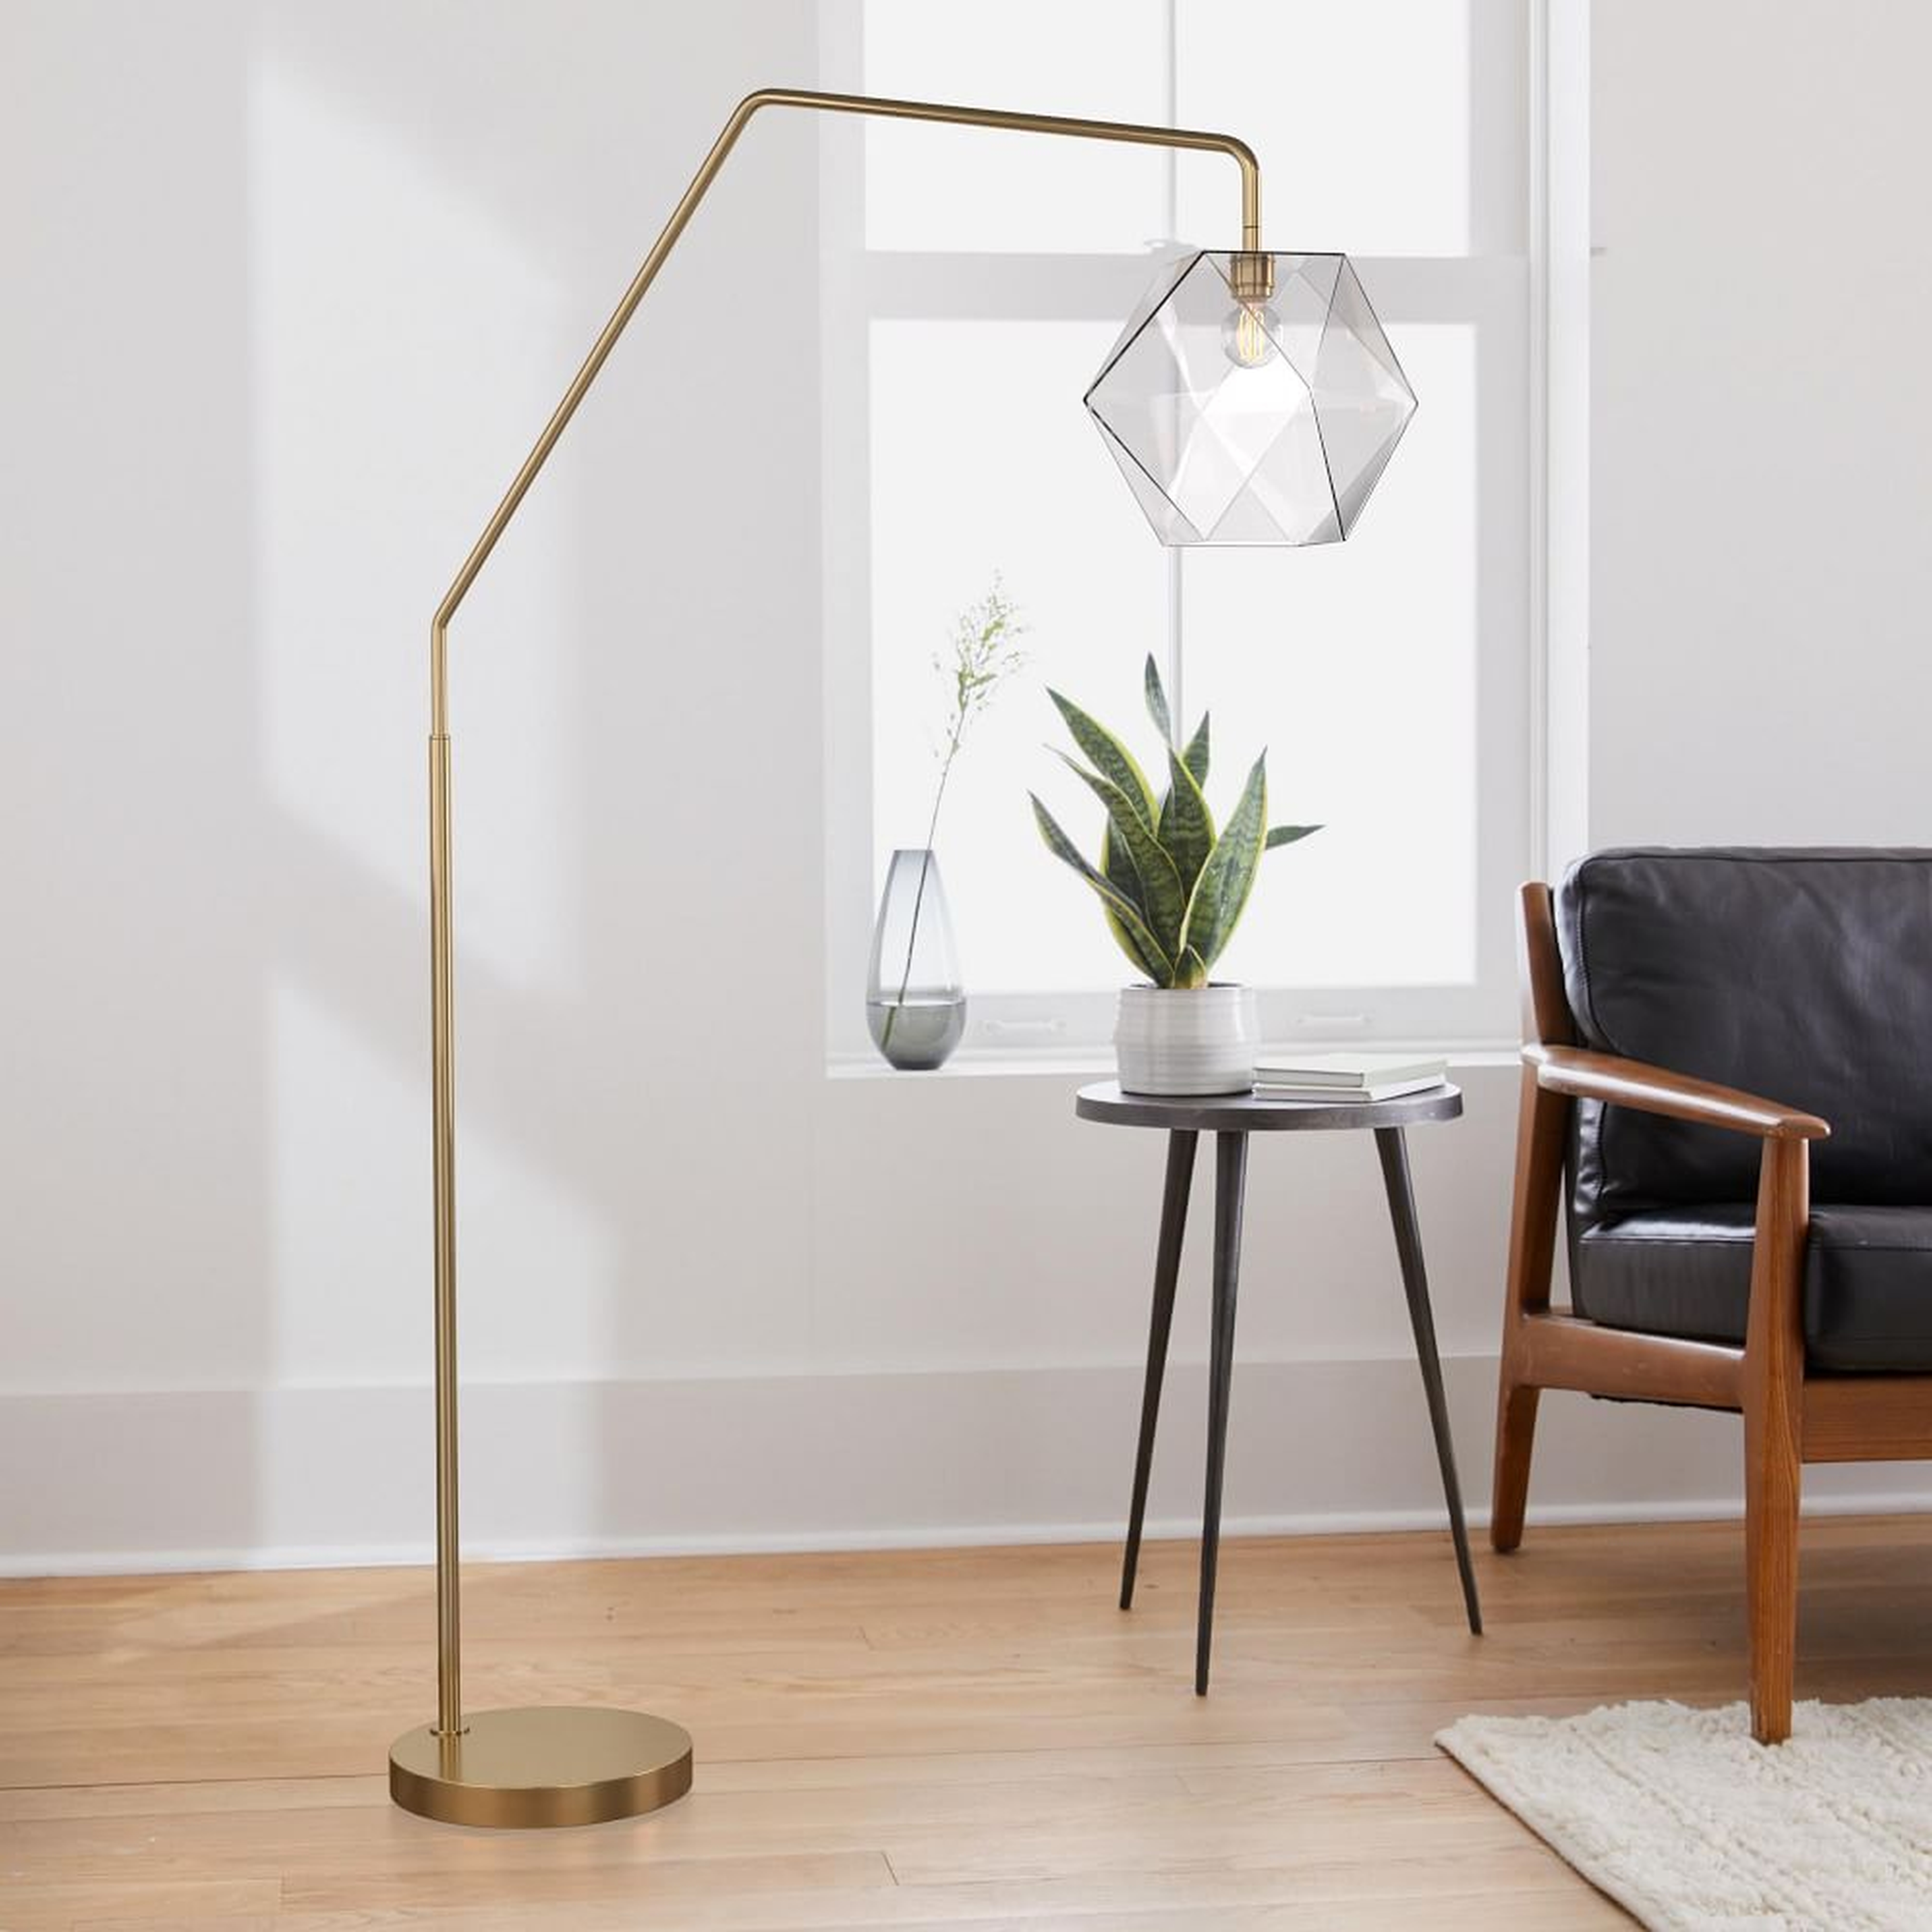 Sculptural Overarching Floor Lamp Antique Brass Clear Glass Faceted (75") - West Elm